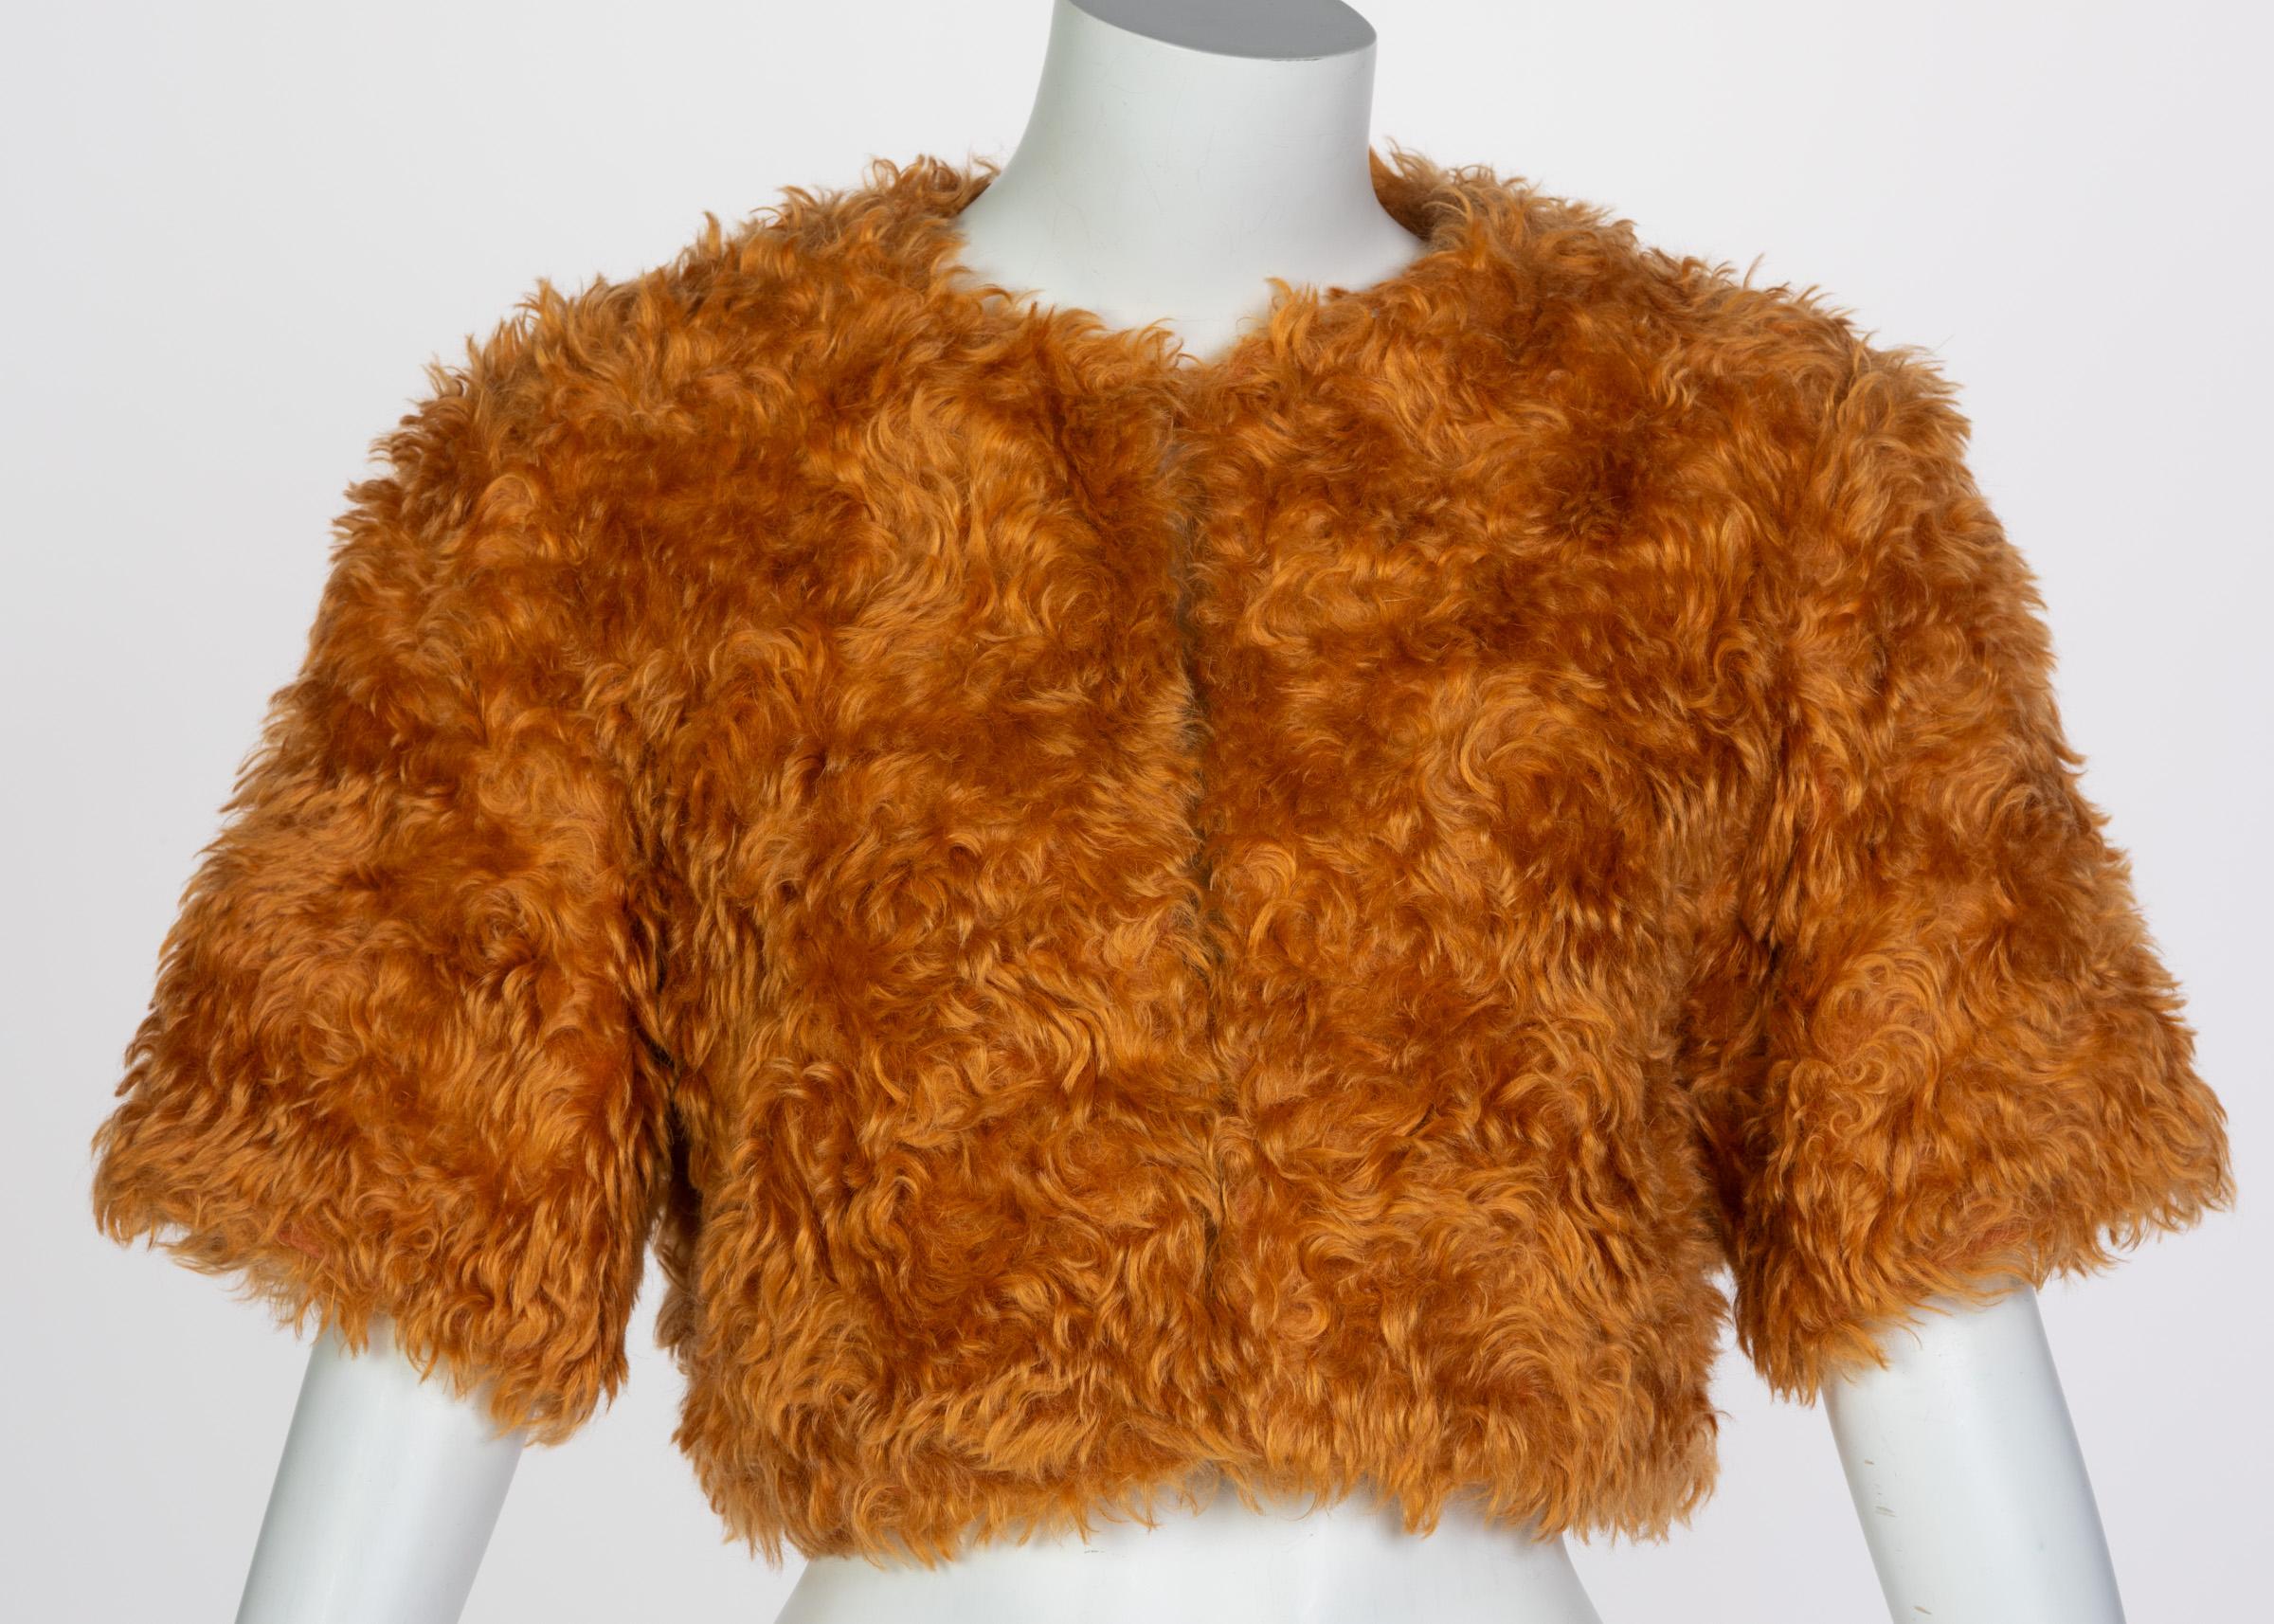 Prada Orange Mohair Cropped Jacket, 2007 In Excellent Condition For Sale In Boca Raton, FL